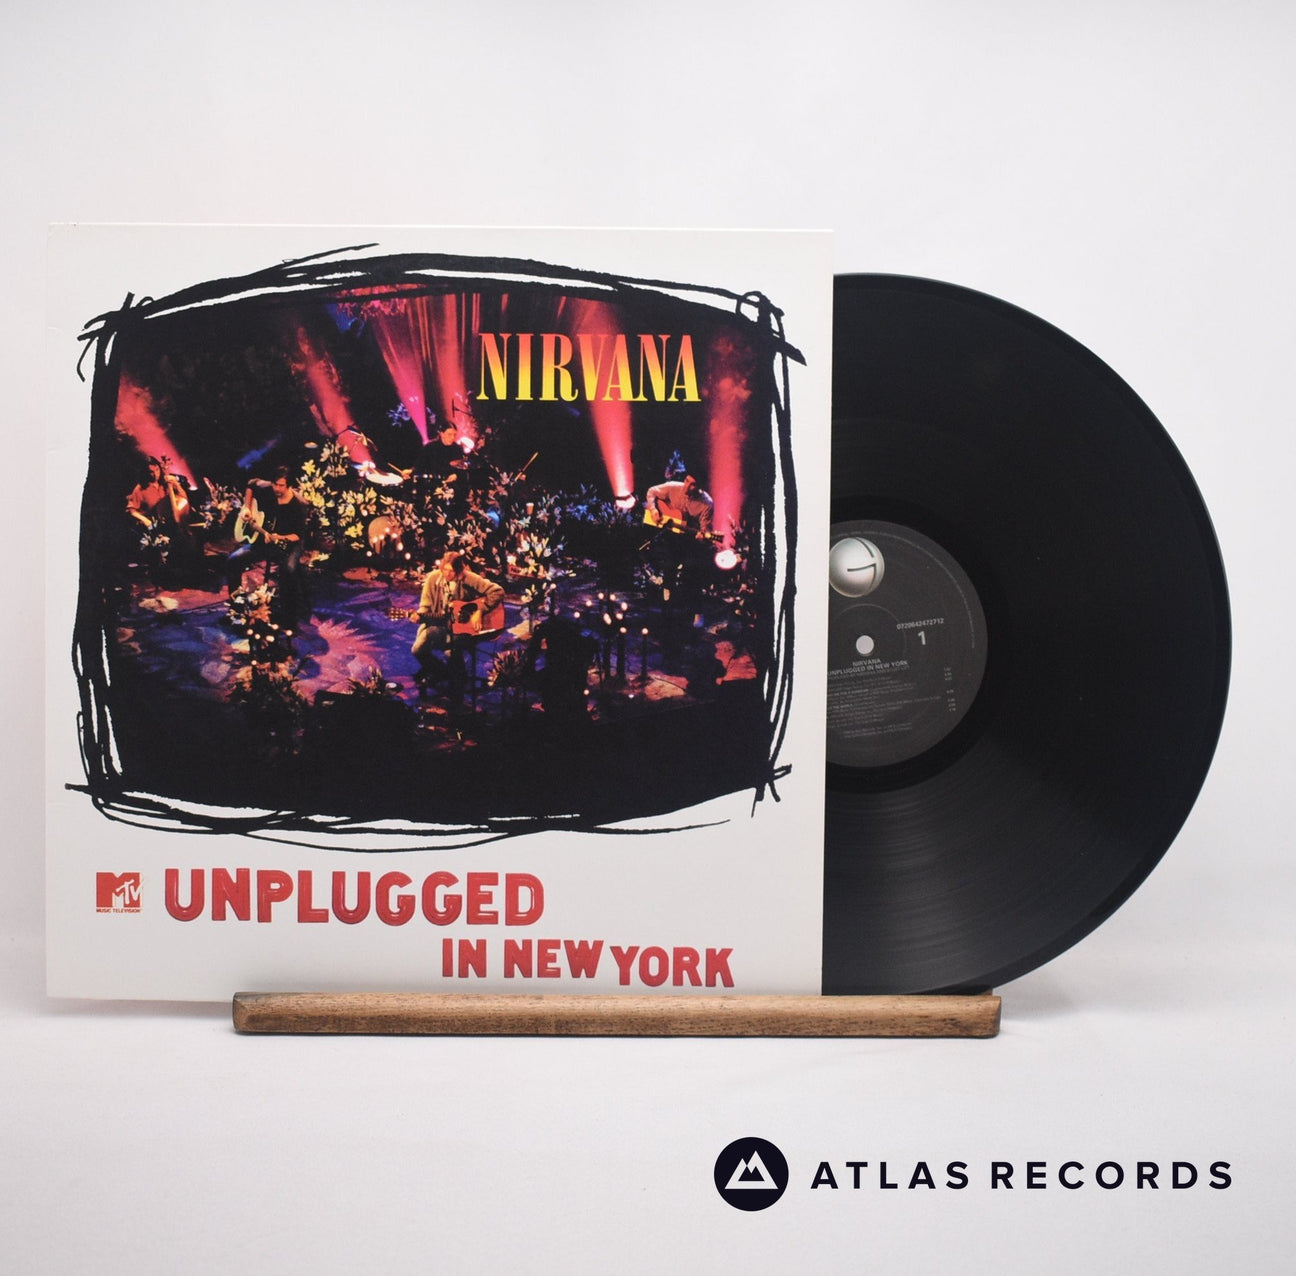 Nirvana MTV Unplugged In New York LP Vinyl Record - Front Cover & Record